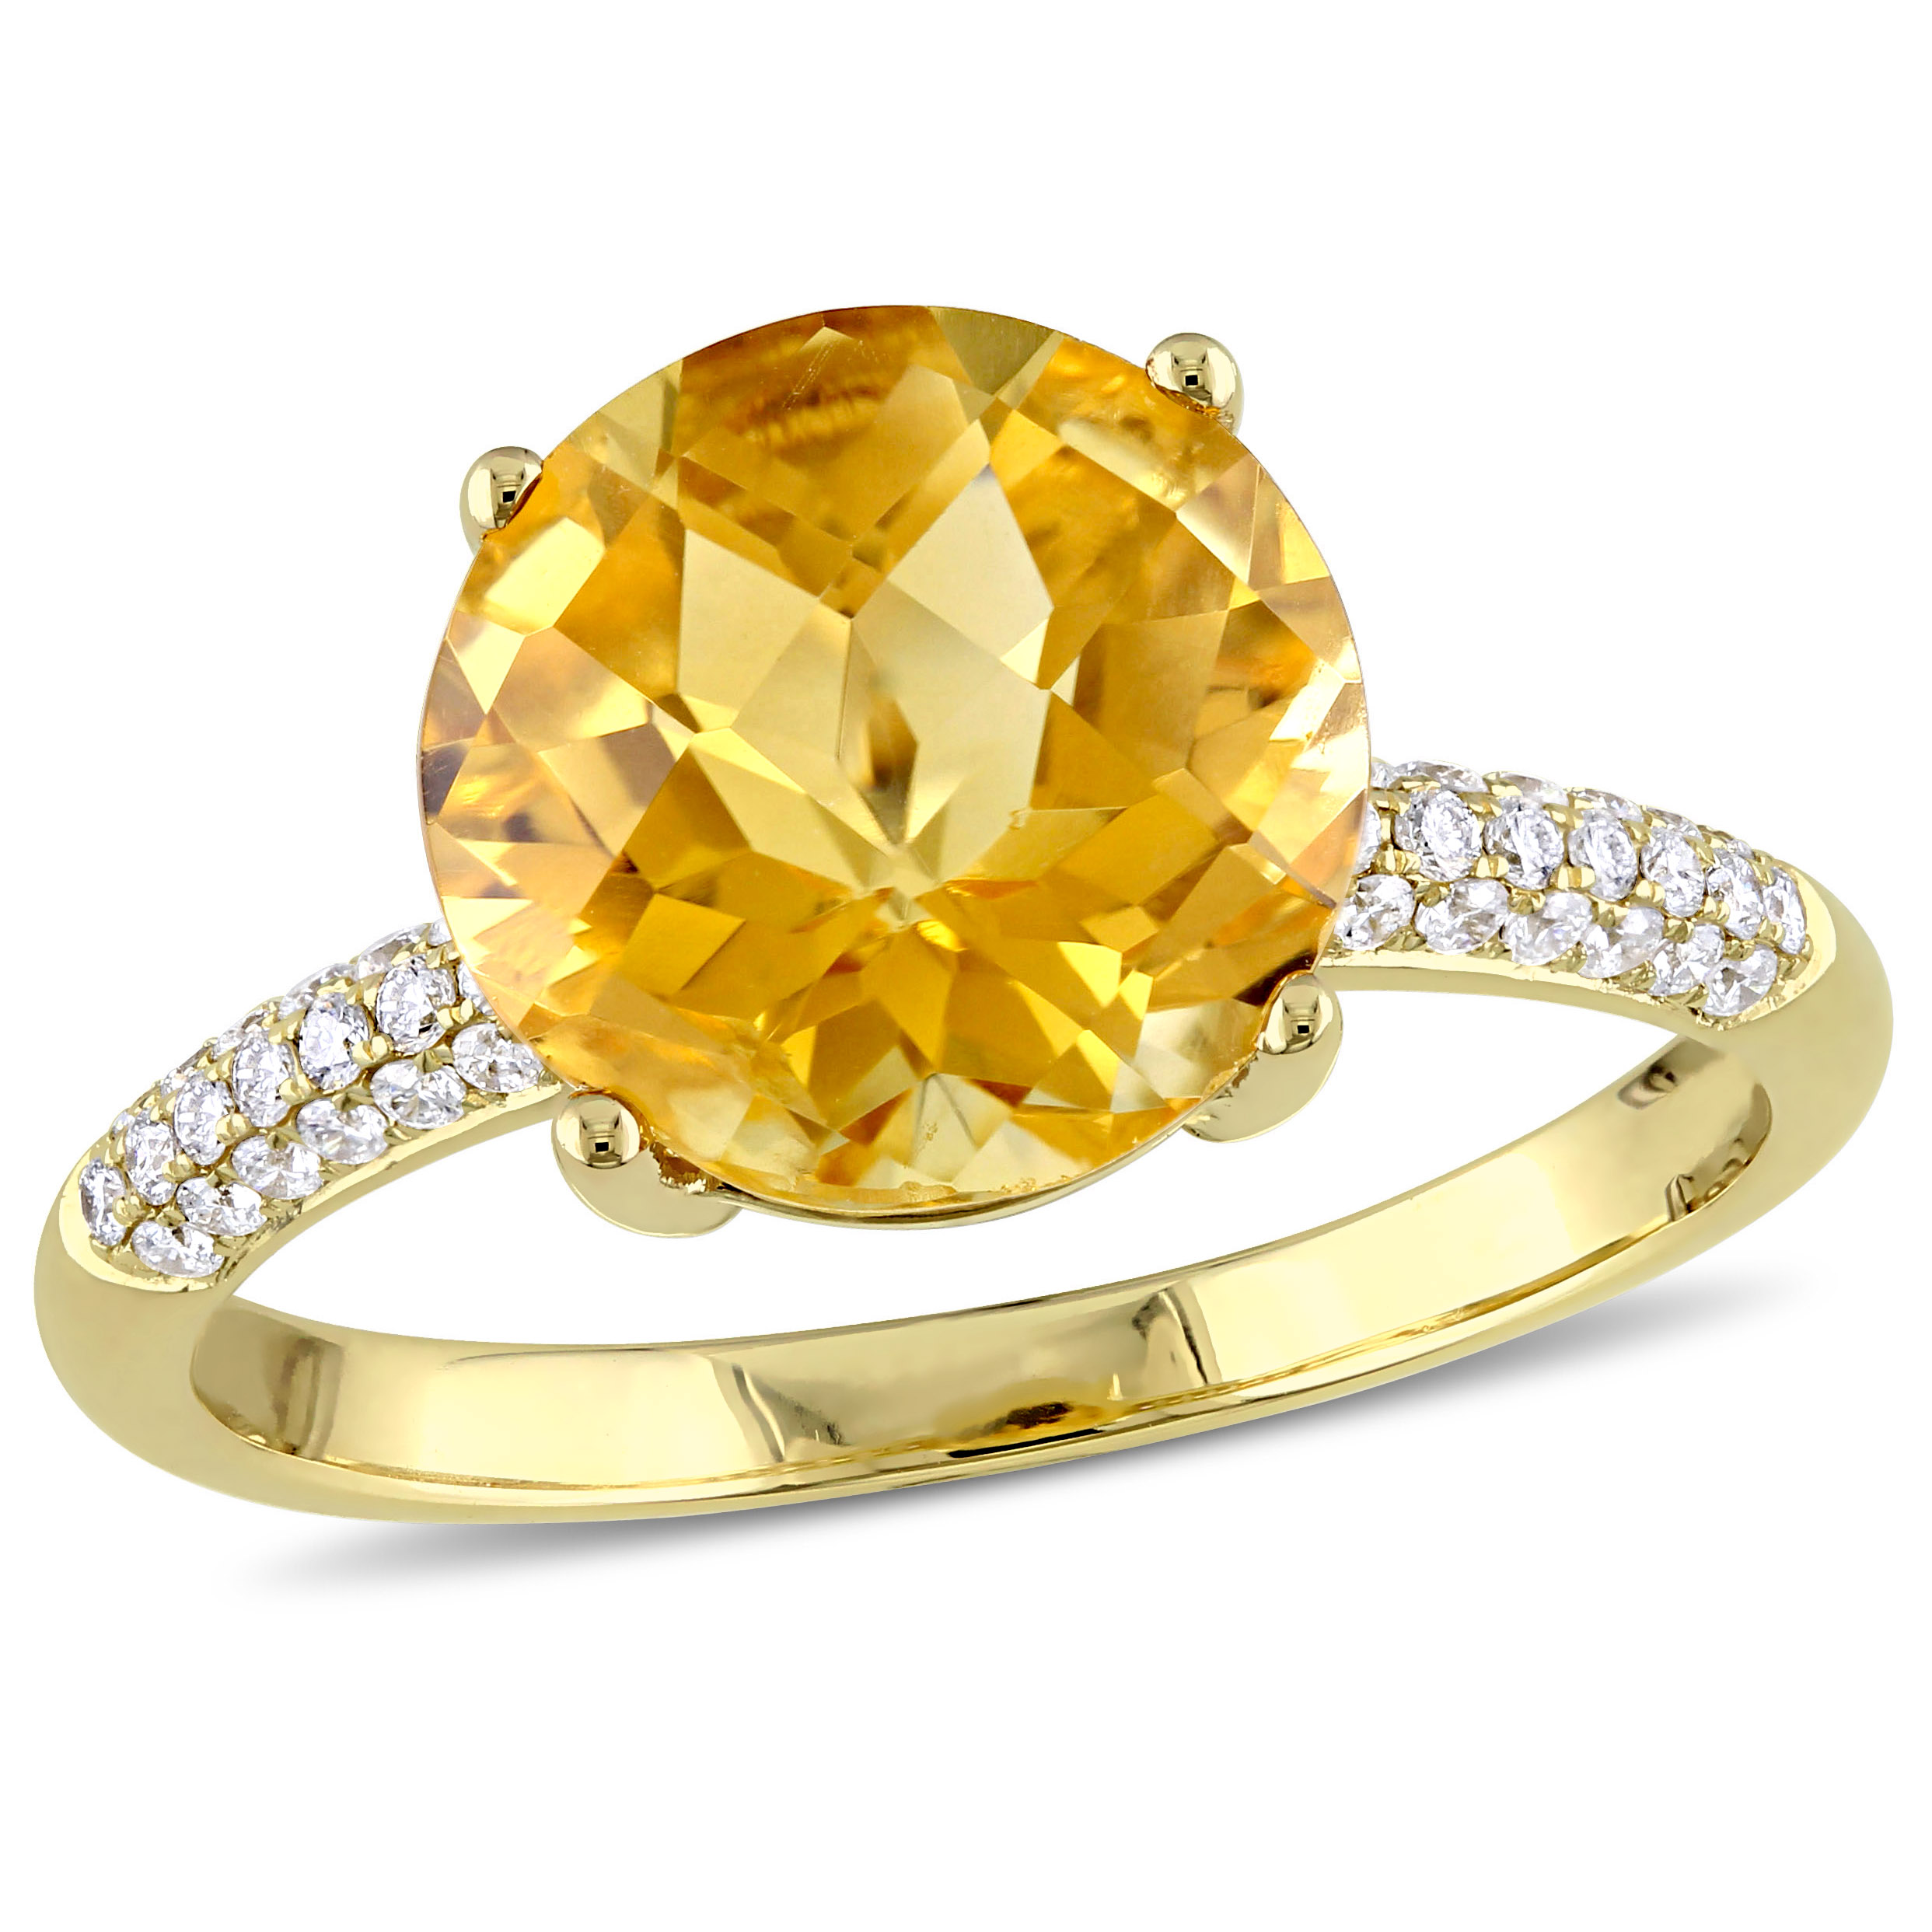 3 1/3 CT TGW Citrine and 1/5 CT TW Diamond Beaded Ring in 14k Yellow Gold